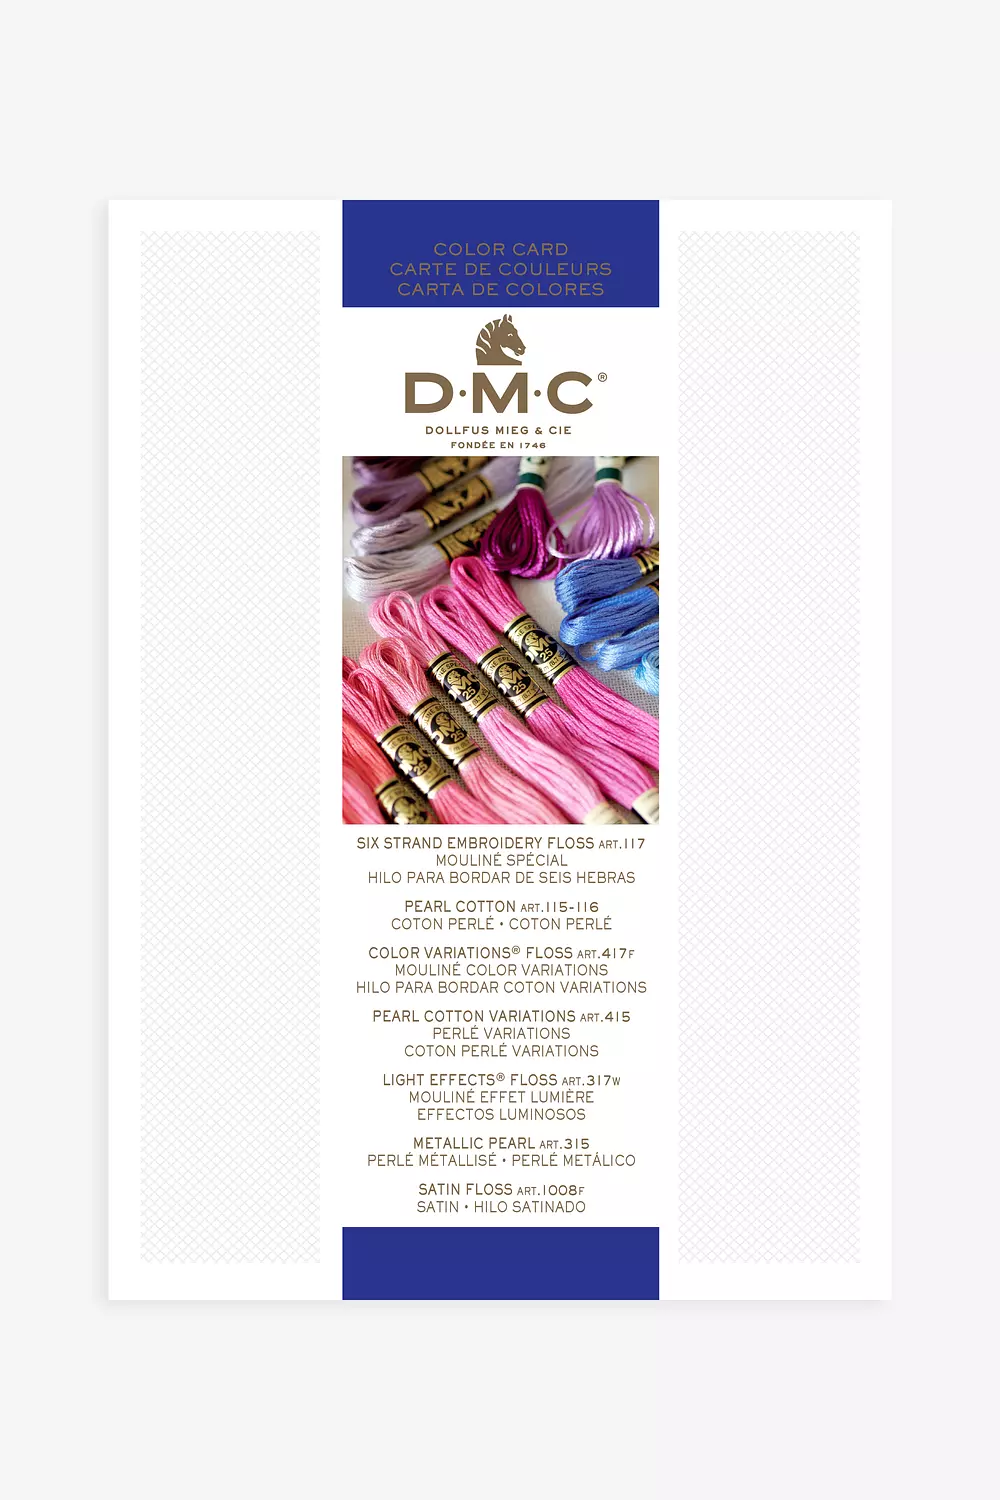 DMC Color Chart  Dmc embroidery floss, Cross stitch embroidery